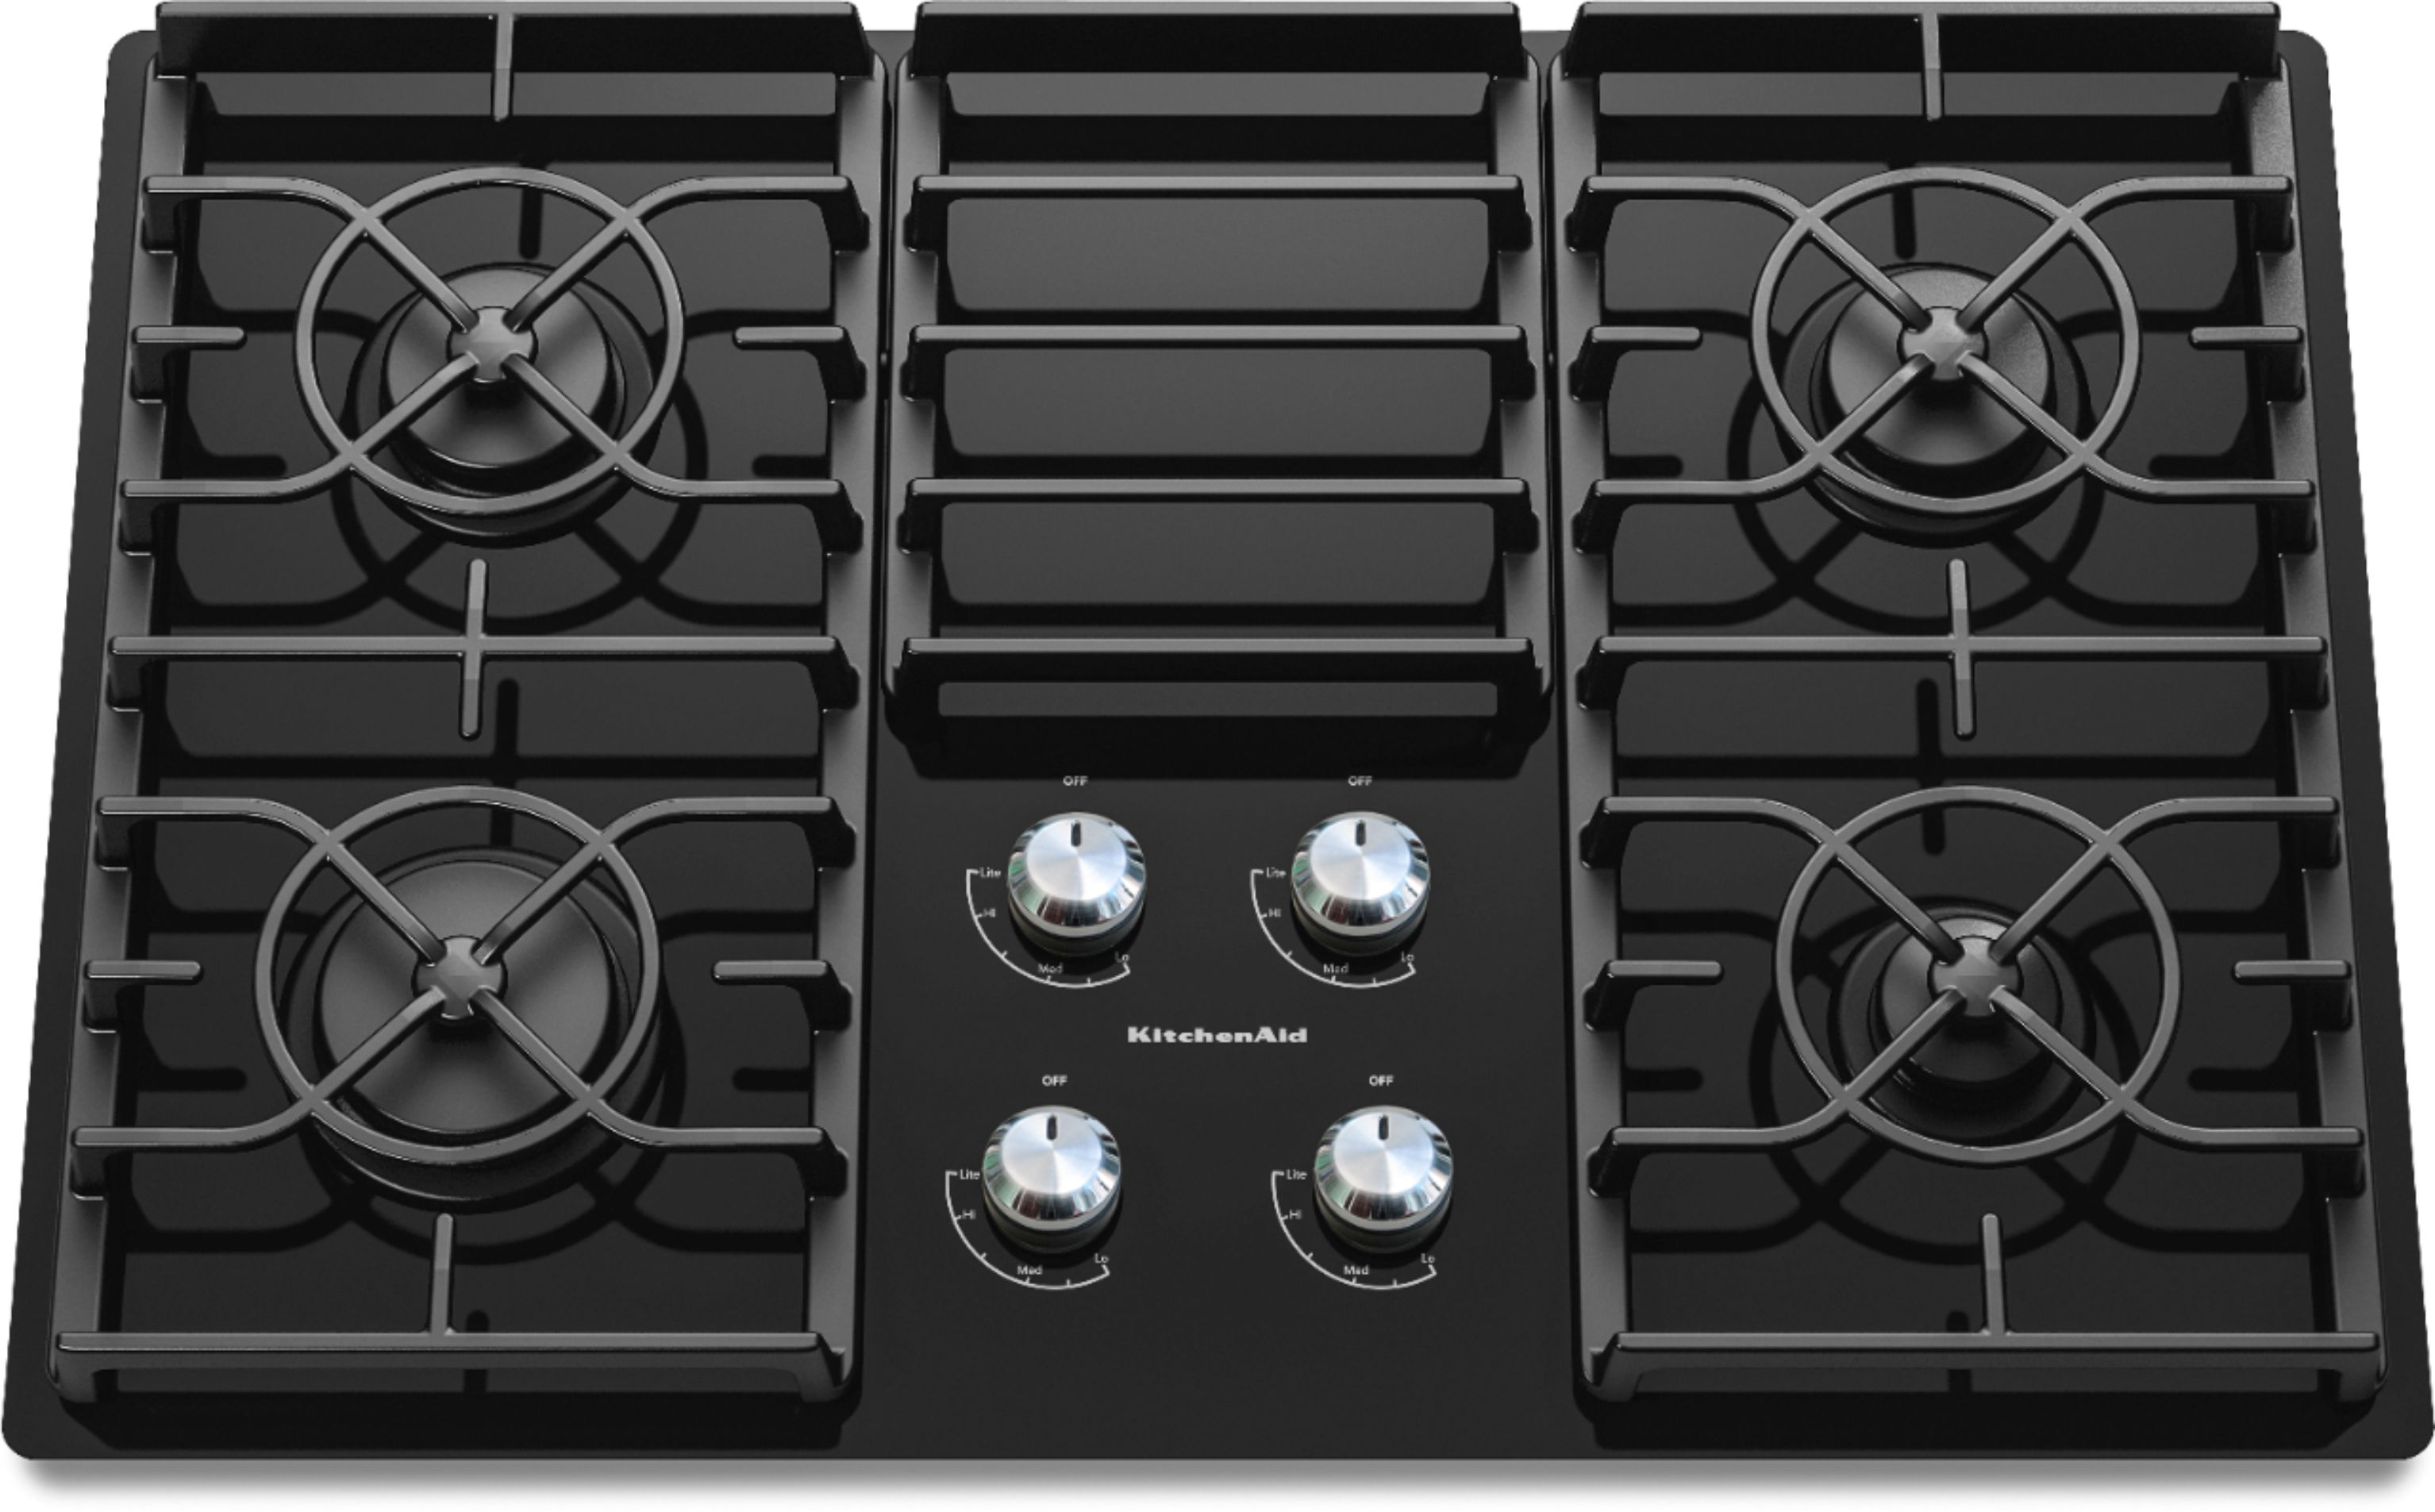 Kitchenaid 30 Built In Gas Cooktop